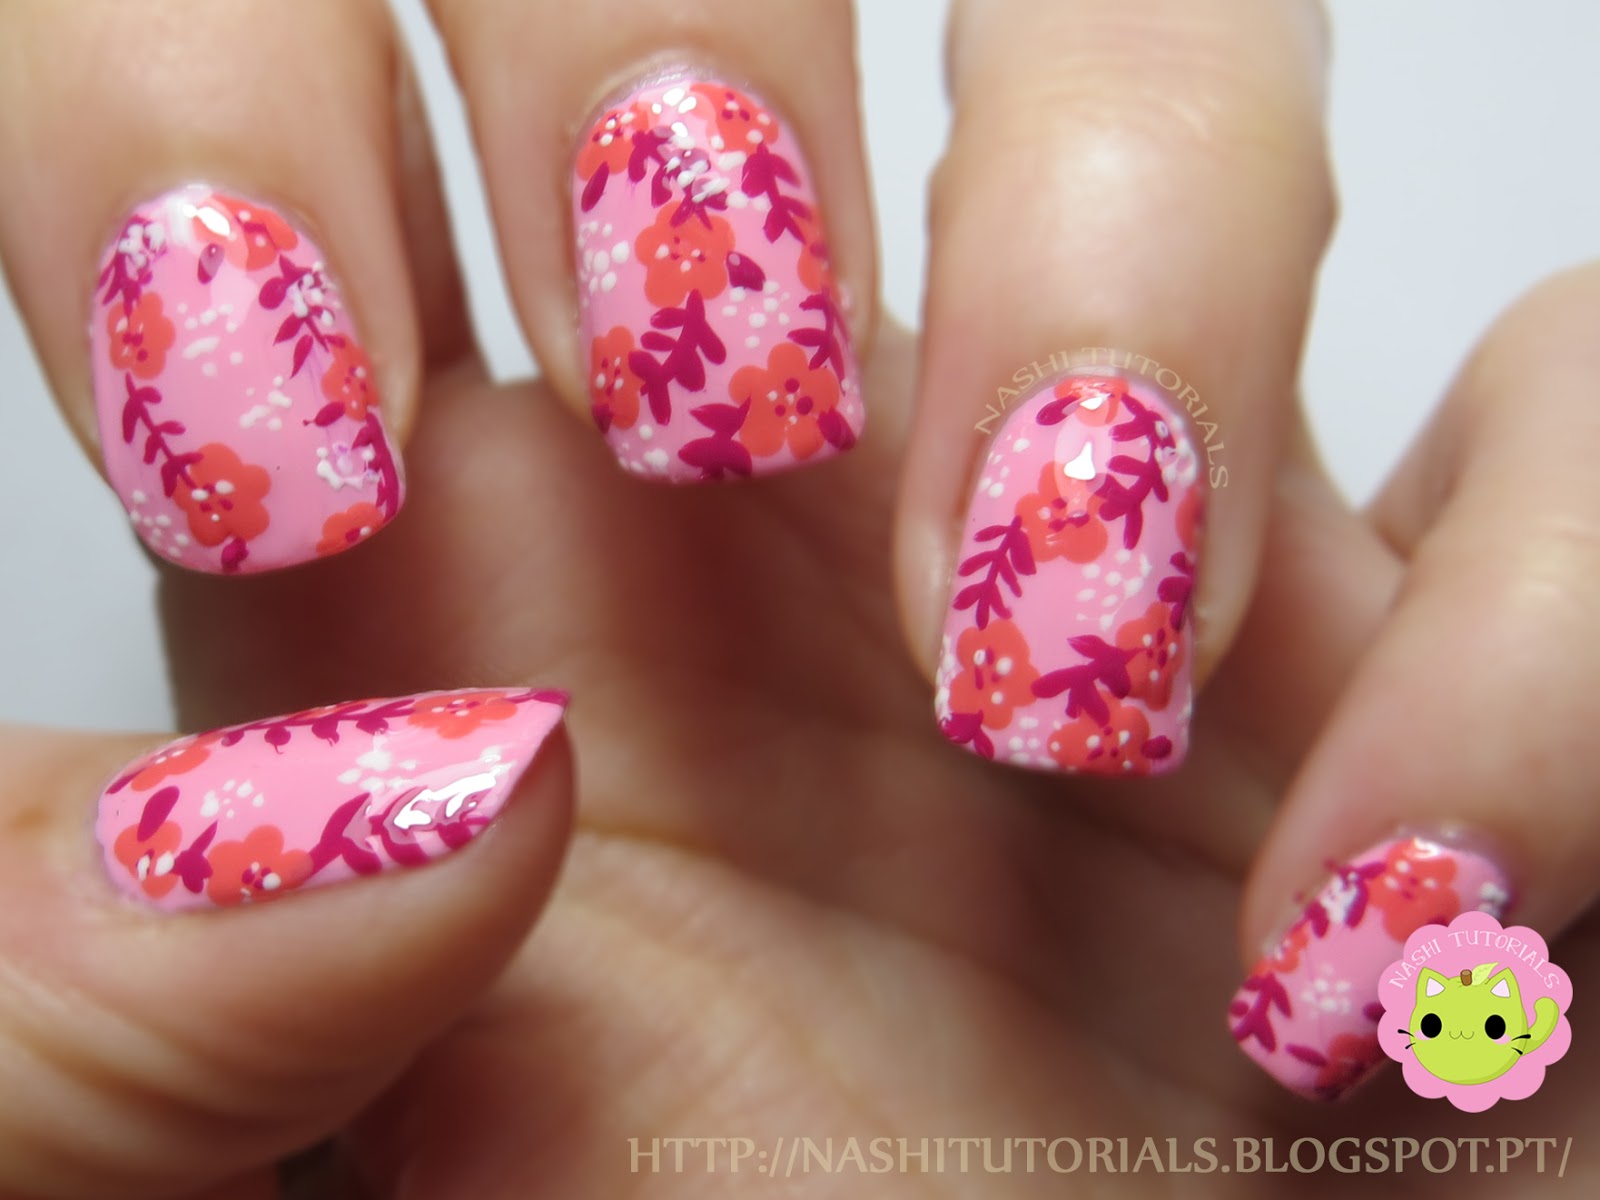 5. Pink and Gold Floral Nail Art - wide 2